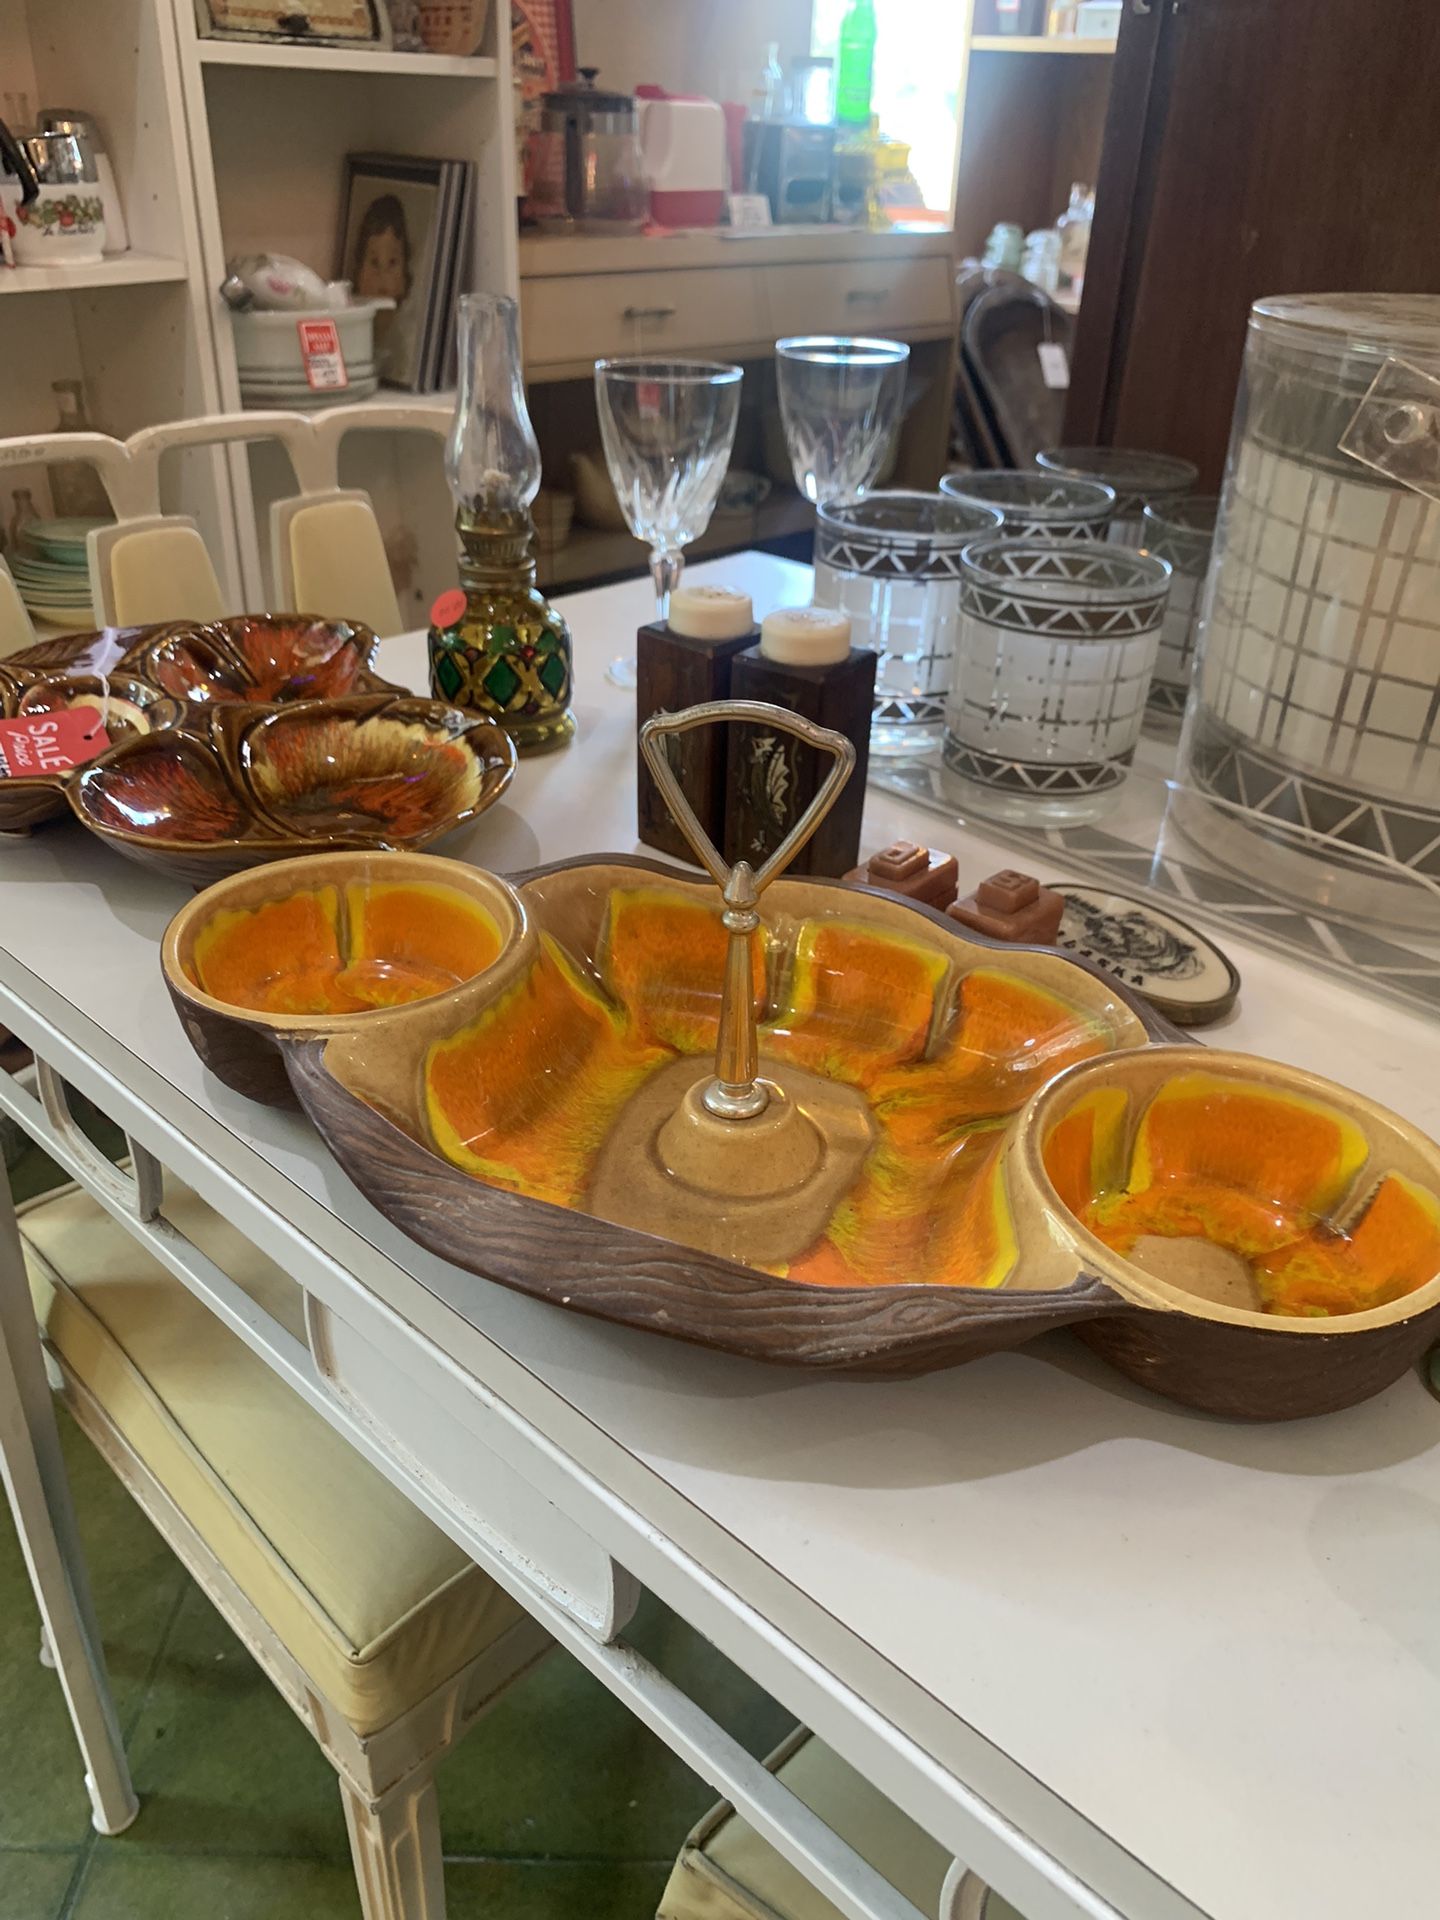 15x9x7 vintage mid-century modern entertainment snack tray dish.  42.00.  Johanna at Antiques and More. Located at 316b Main Street Buda. Antiques vin